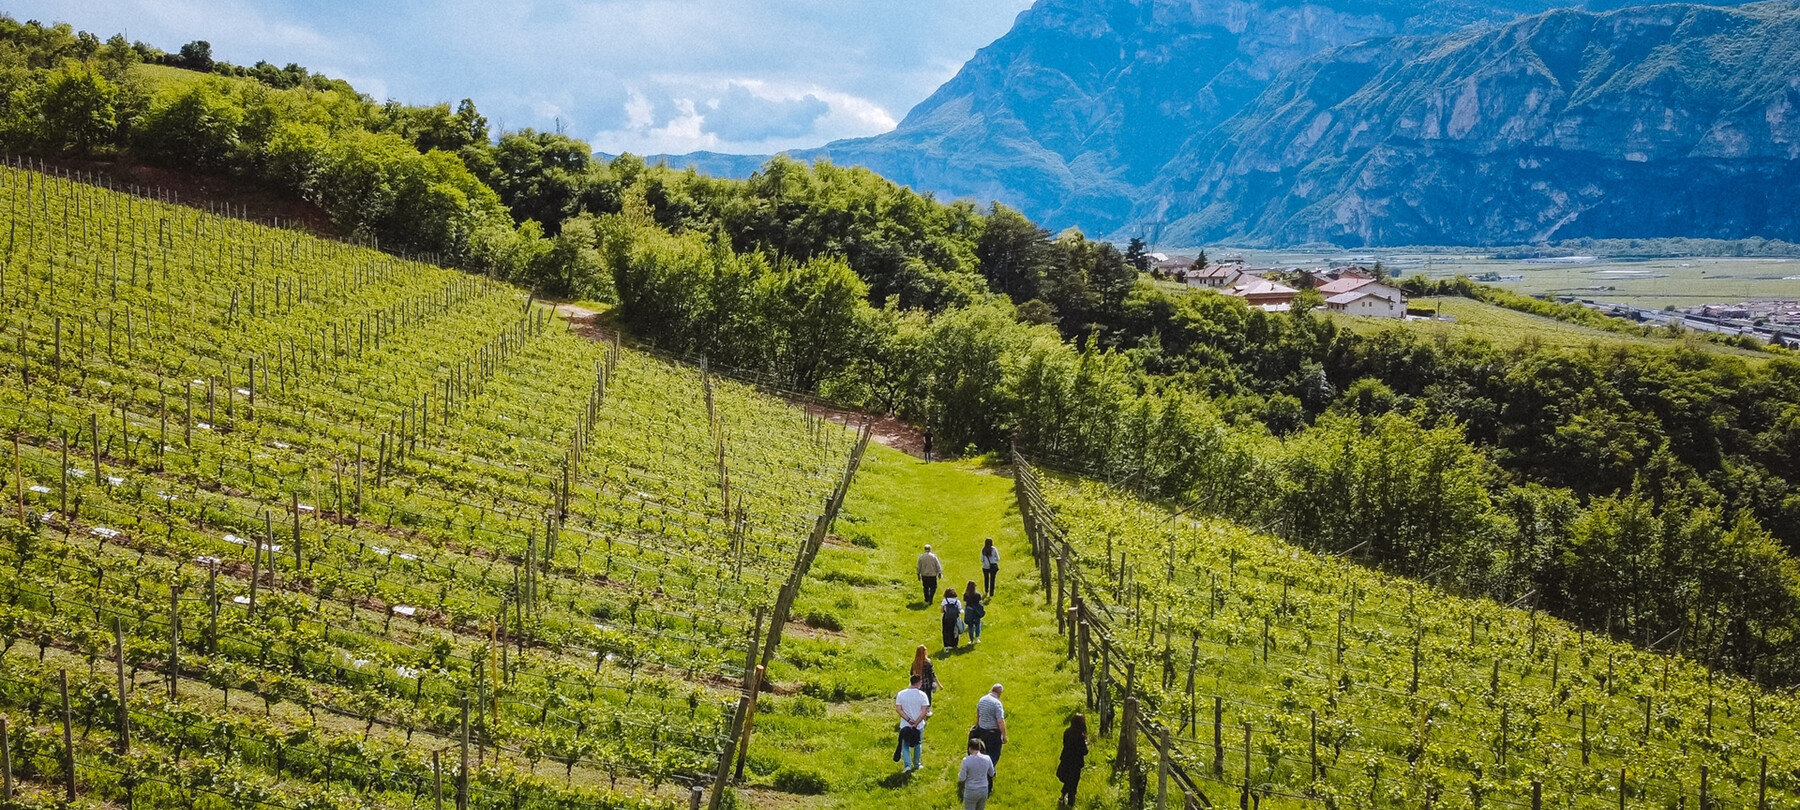 Trentino craft beer tour, from Lavis to Val di Non